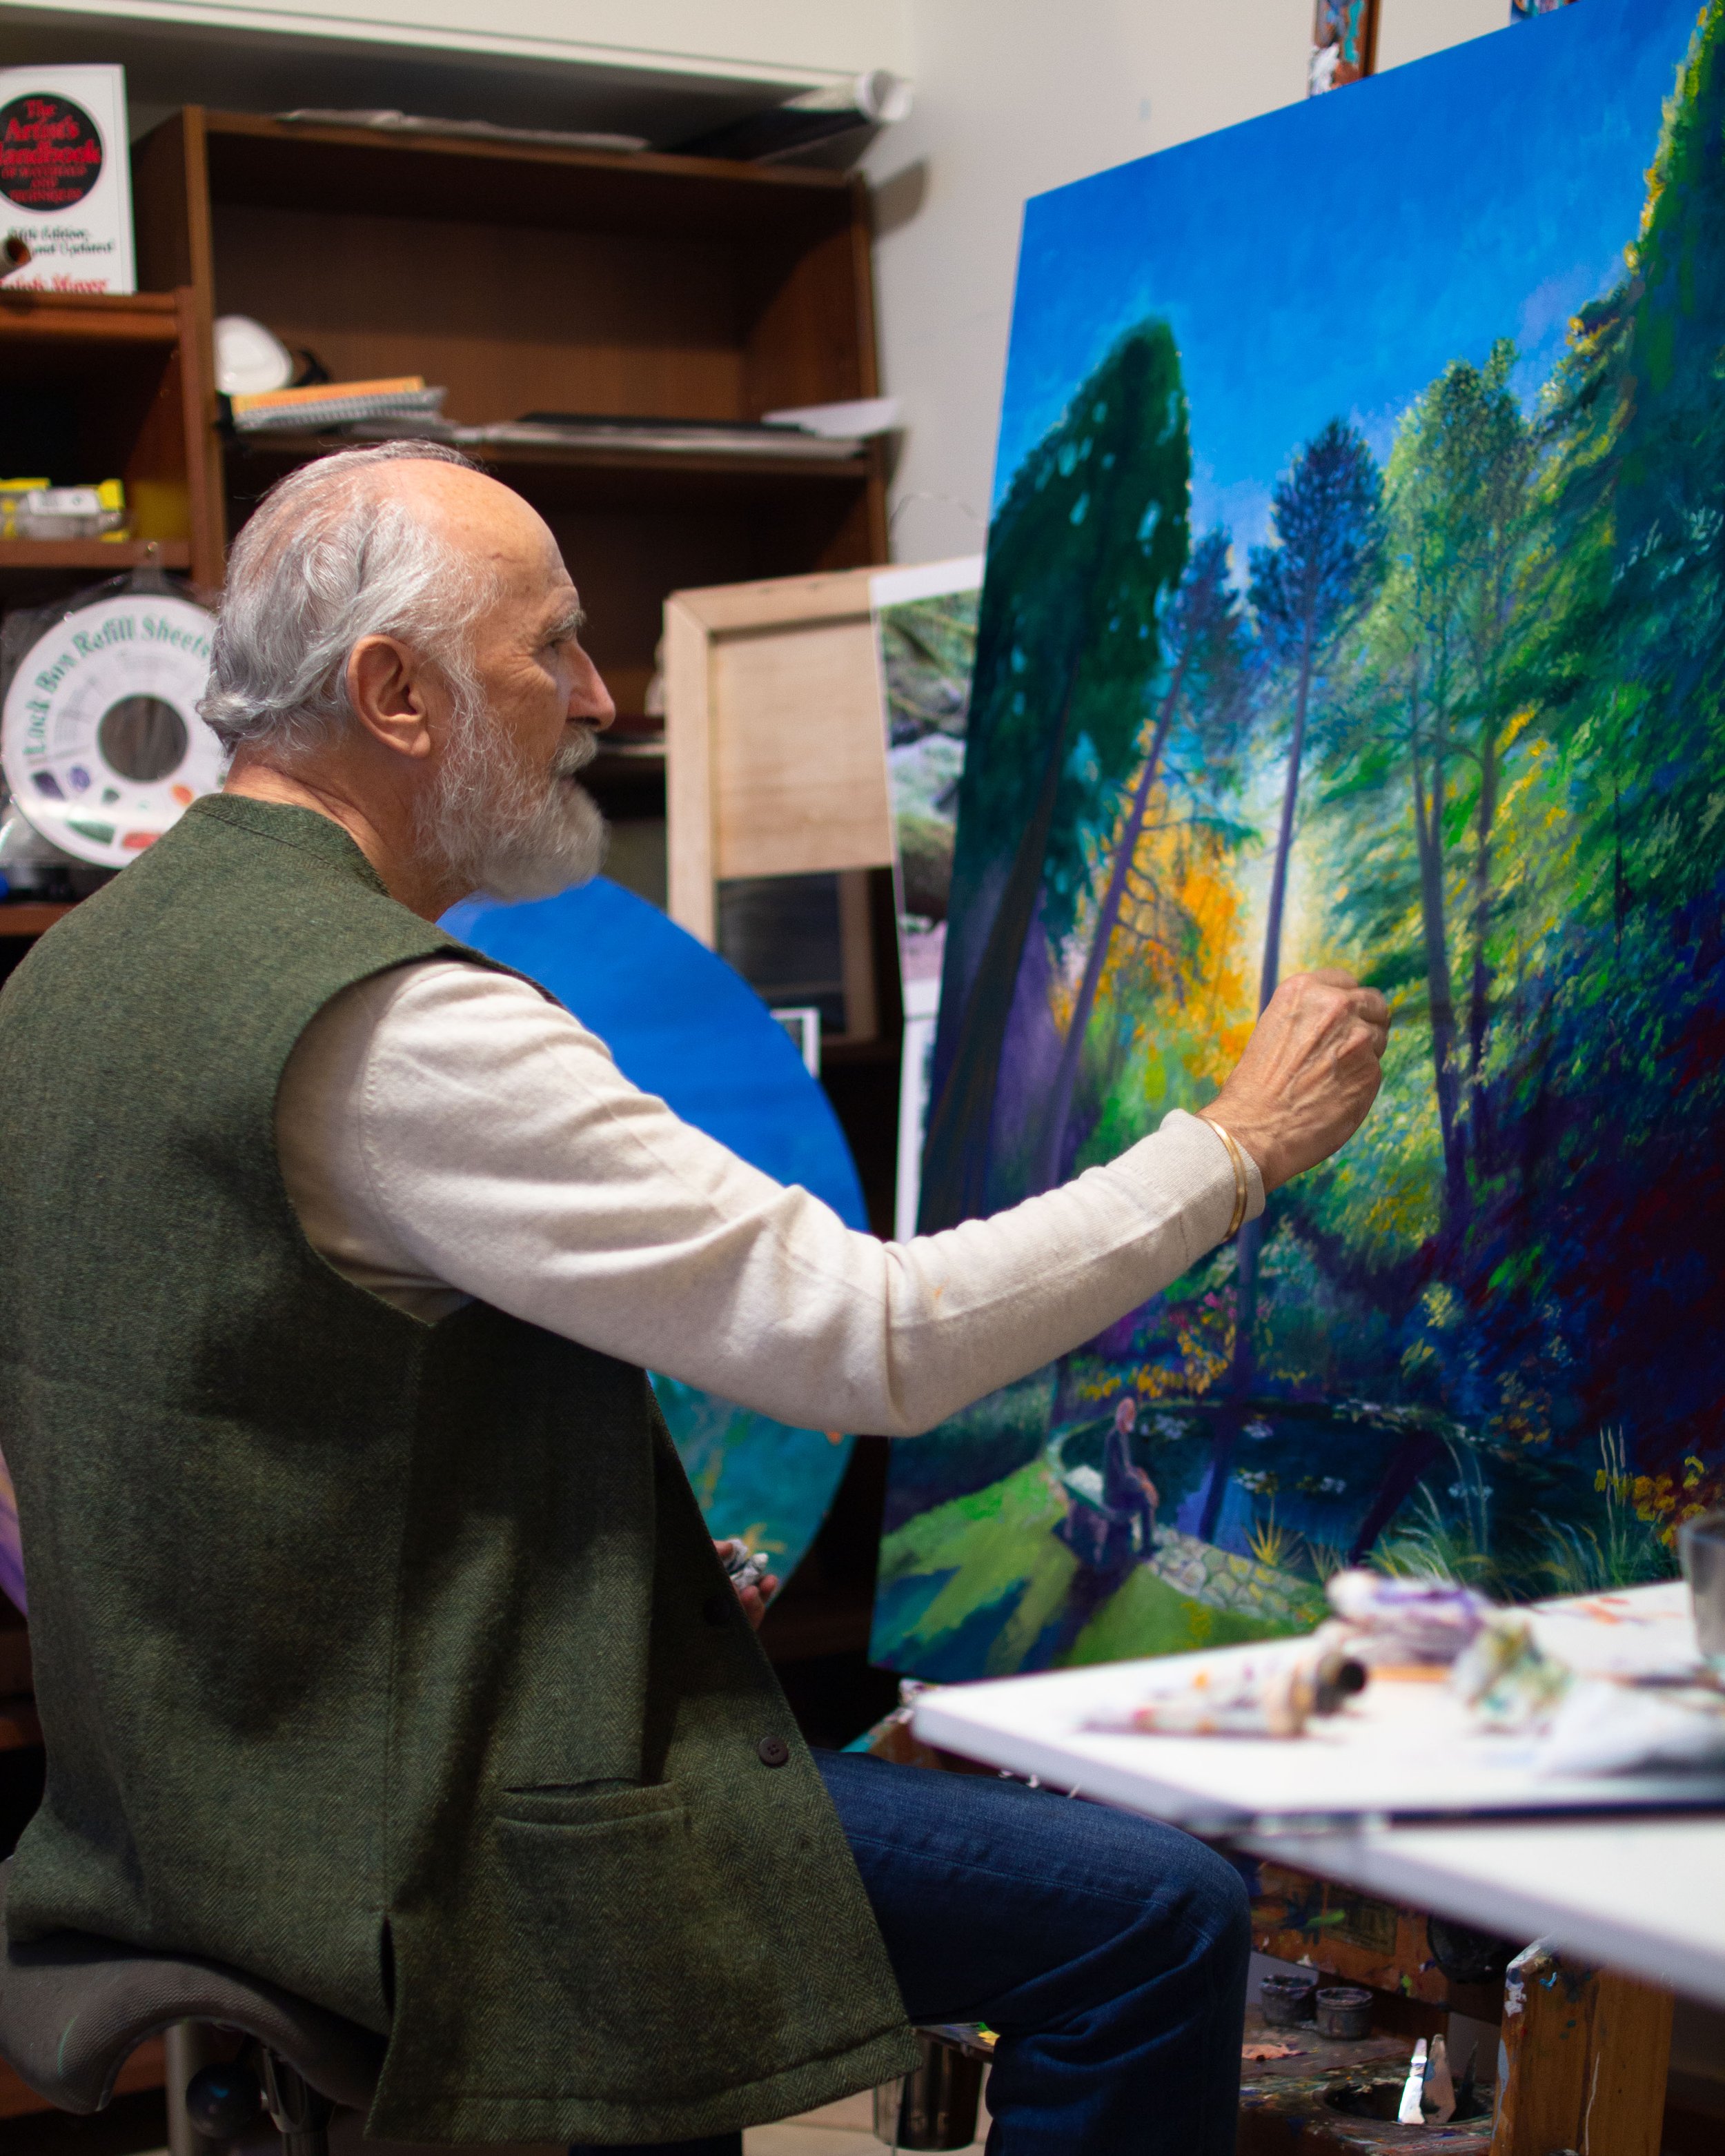 in the Studio, working on "Old Man Sitting by Shalimar Pond